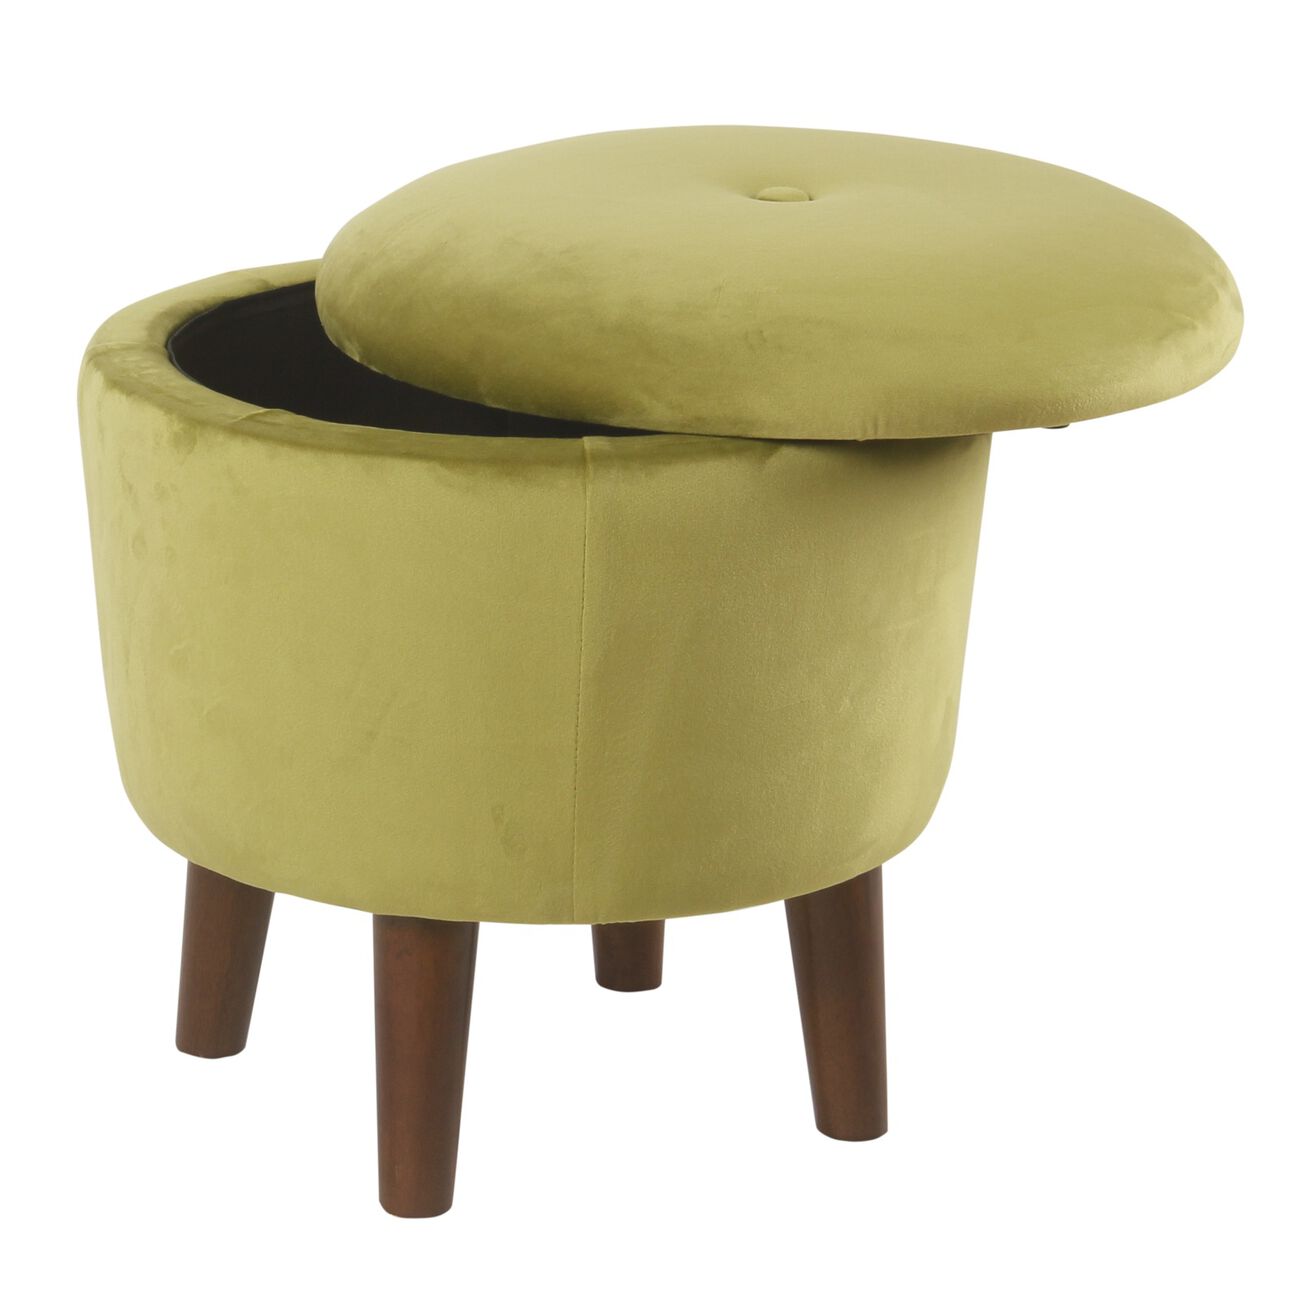 Velvet Upholstered Tufted Ottoman with Tapered Legs and Hidden Storage, Green and Brown